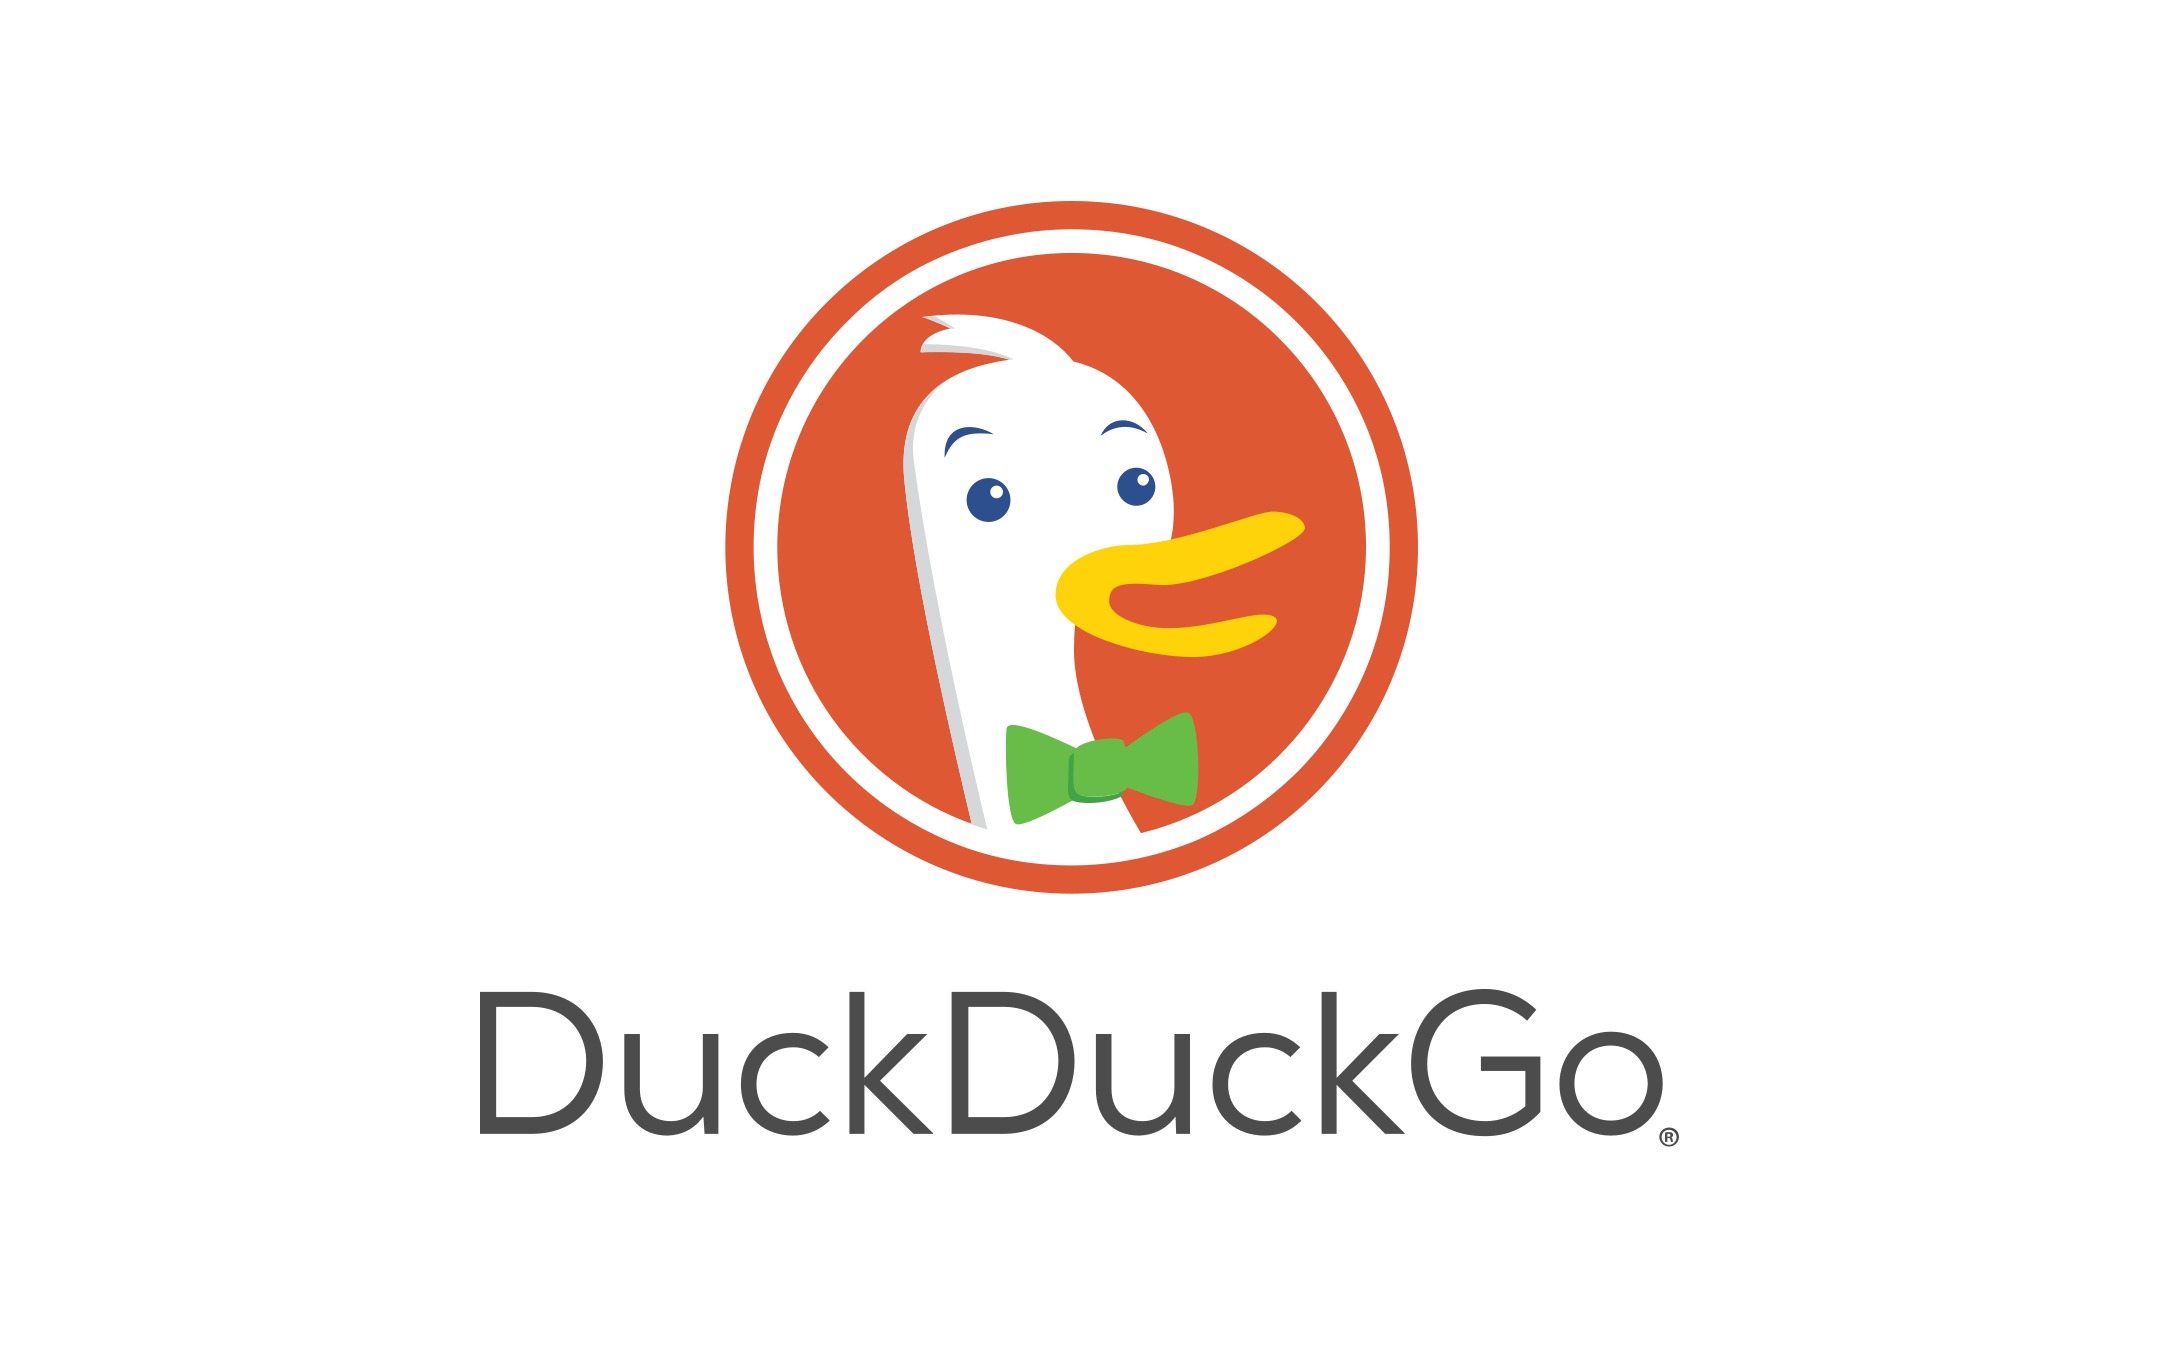 DuckDuckGo - the search engine launches its browser for Windows